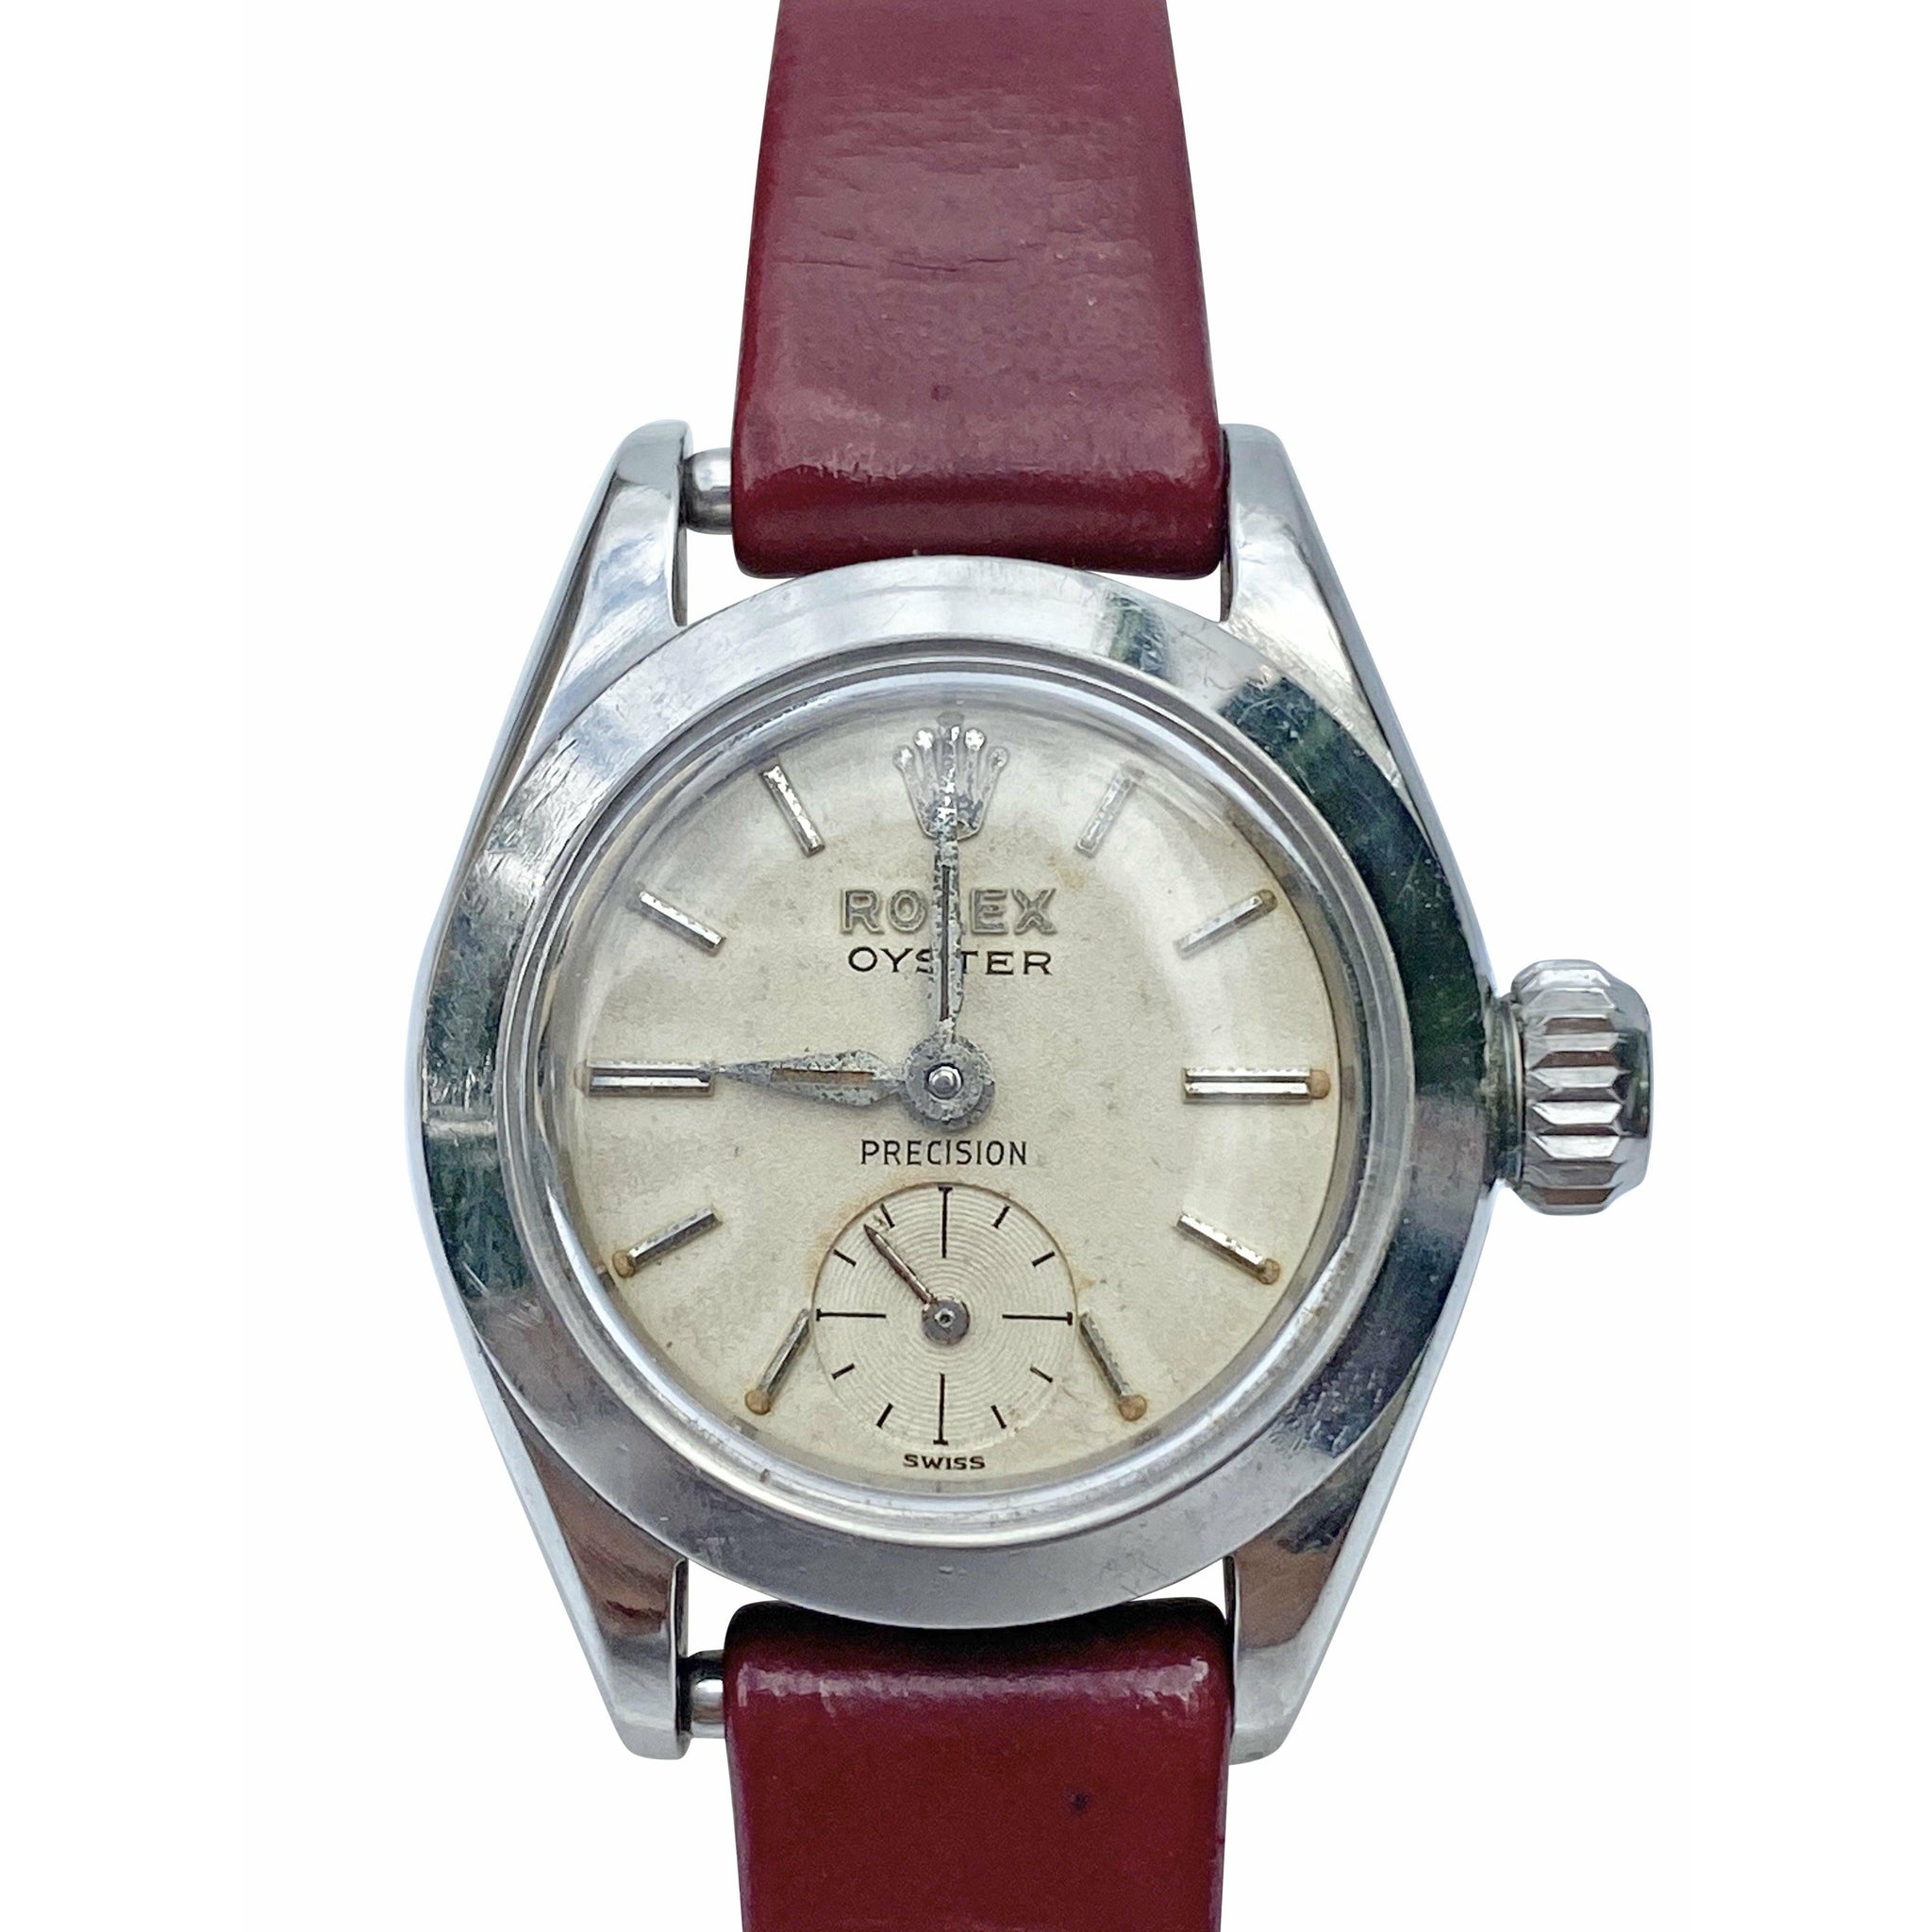 1950's Rolex Oyster Speedking Precision women's watch in red leather strap-watch-ASSAY